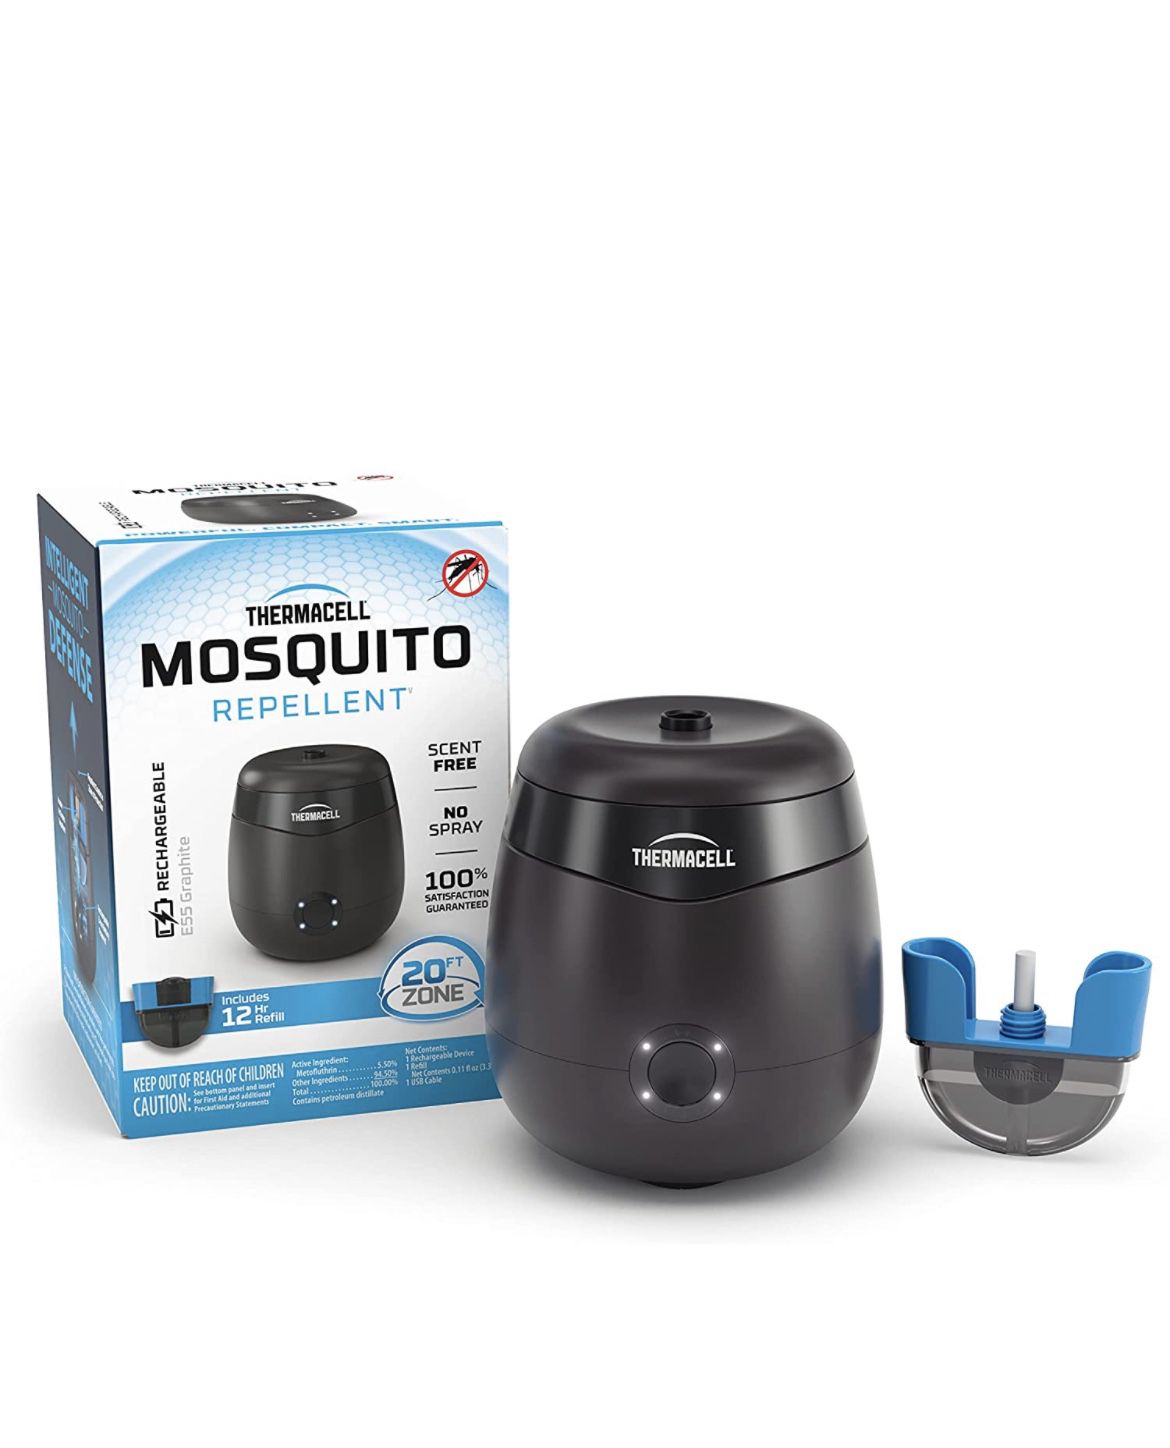 Thermacell Mosquito Rechargeable Repeller E-Series E55 with 20’ Mosquito Protection Zone; DEET Free Bug Spray Alterna